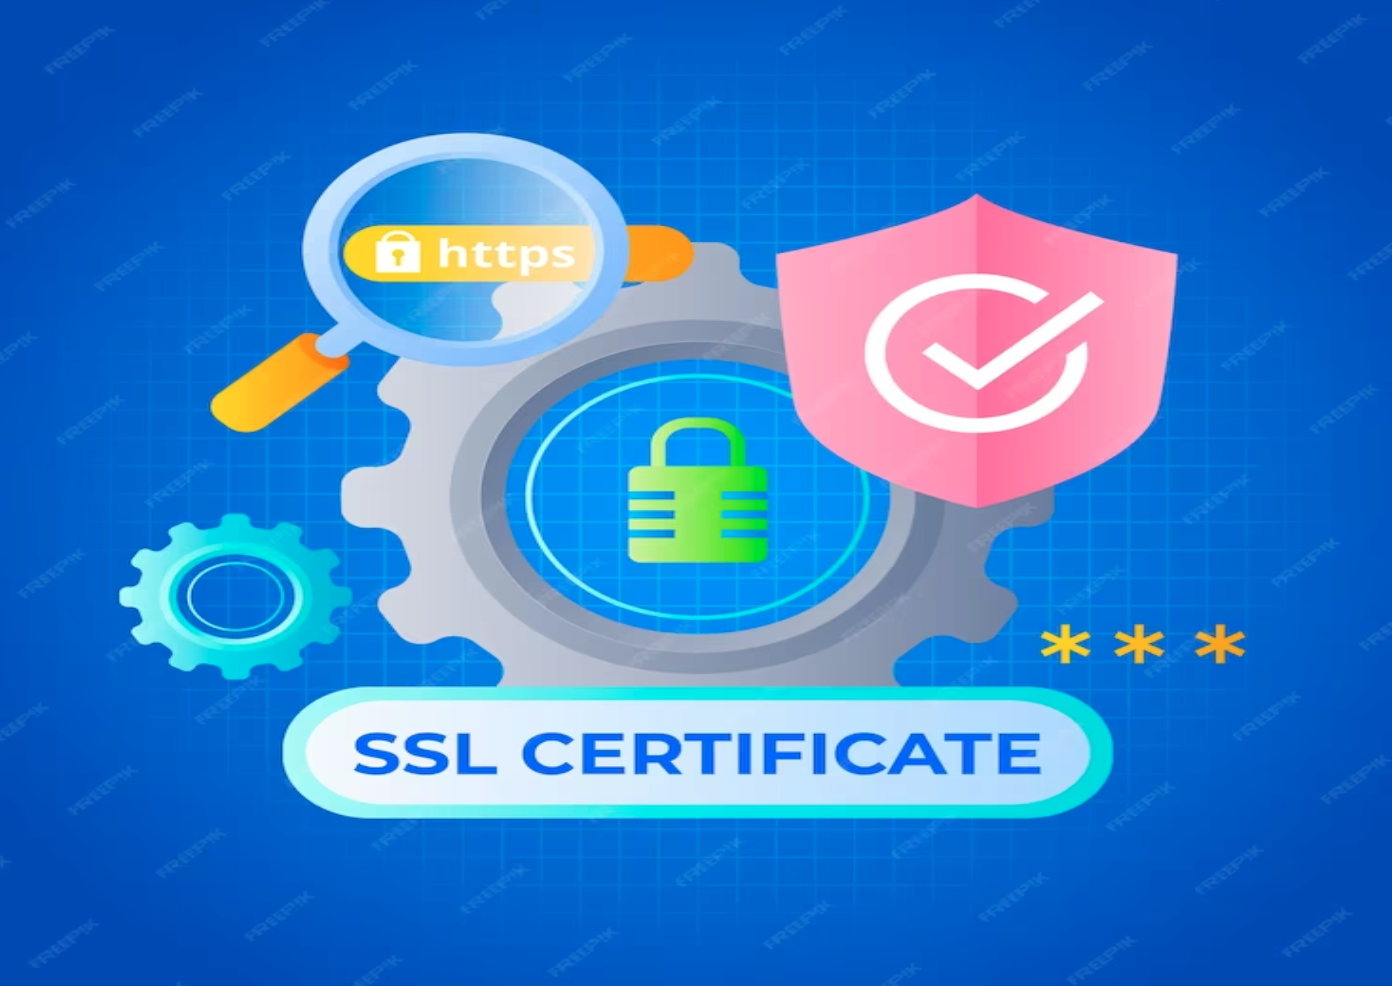 Graphic featuring various symbols of cybersecurity with the words SSL Certificate underneath; graphic by Freepik, via Freepik.com.